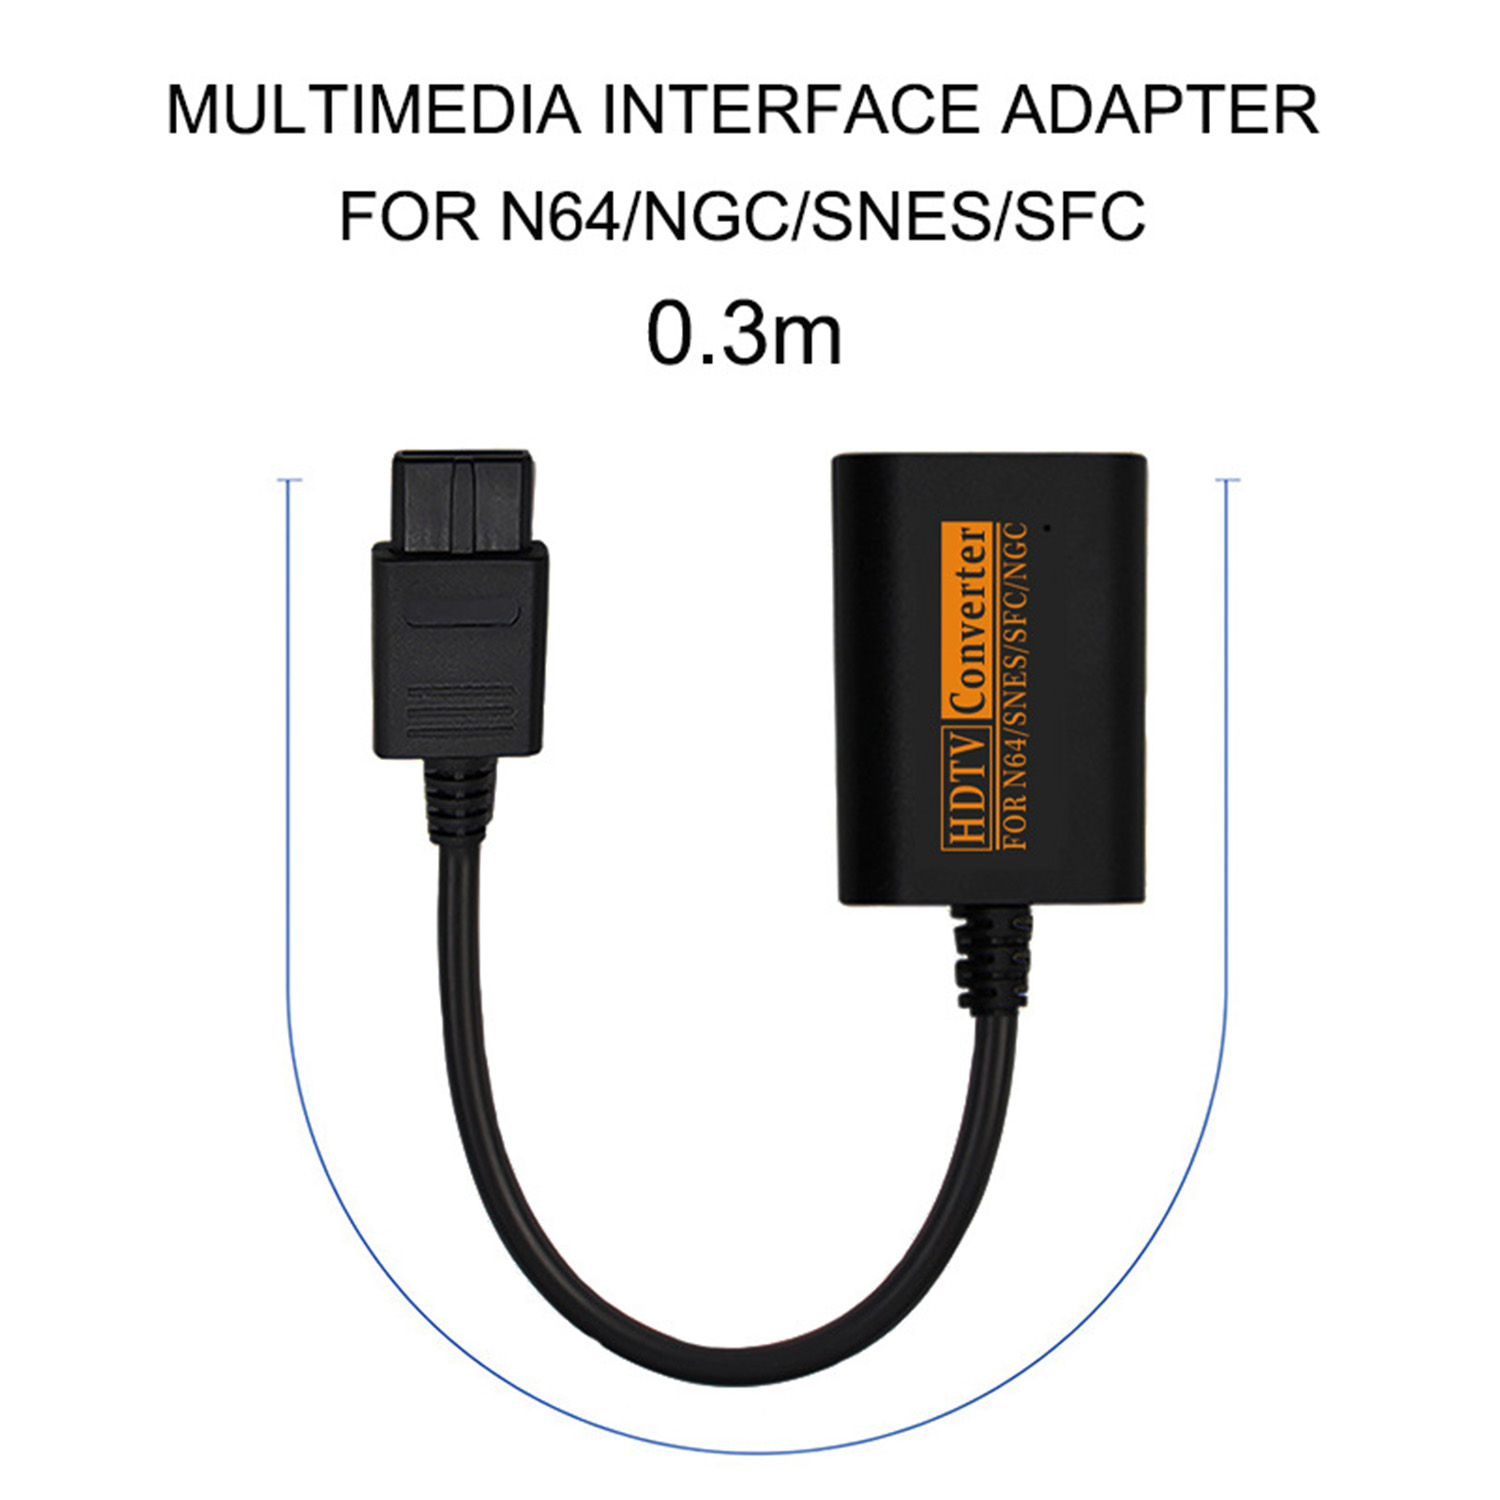 Bitfunx-HDMI-compatible-Converter-Adapter-for-NGCSNESN64SFC-for-Nintendo-64-for-GameCube-Plug-And-Pl-1887824-7